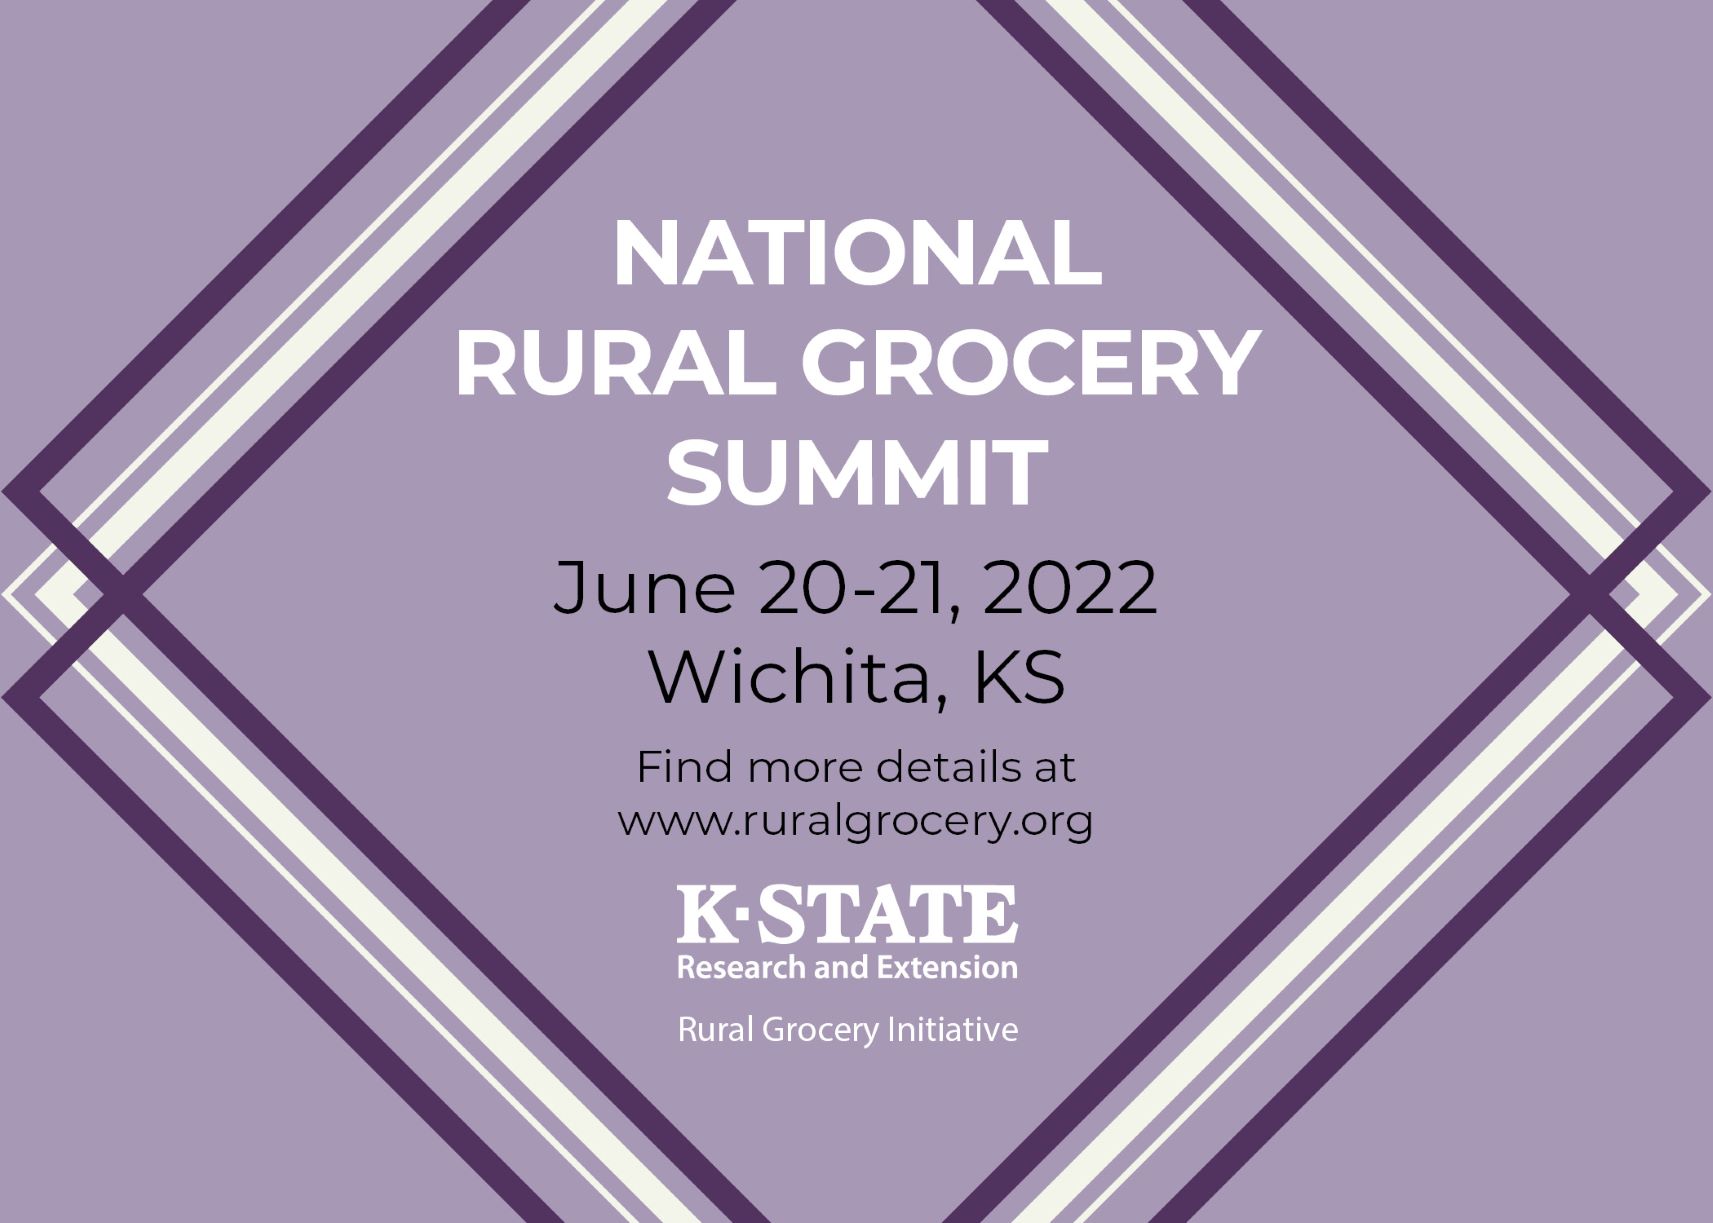 Save the Date for the National Rural Grocery Summit